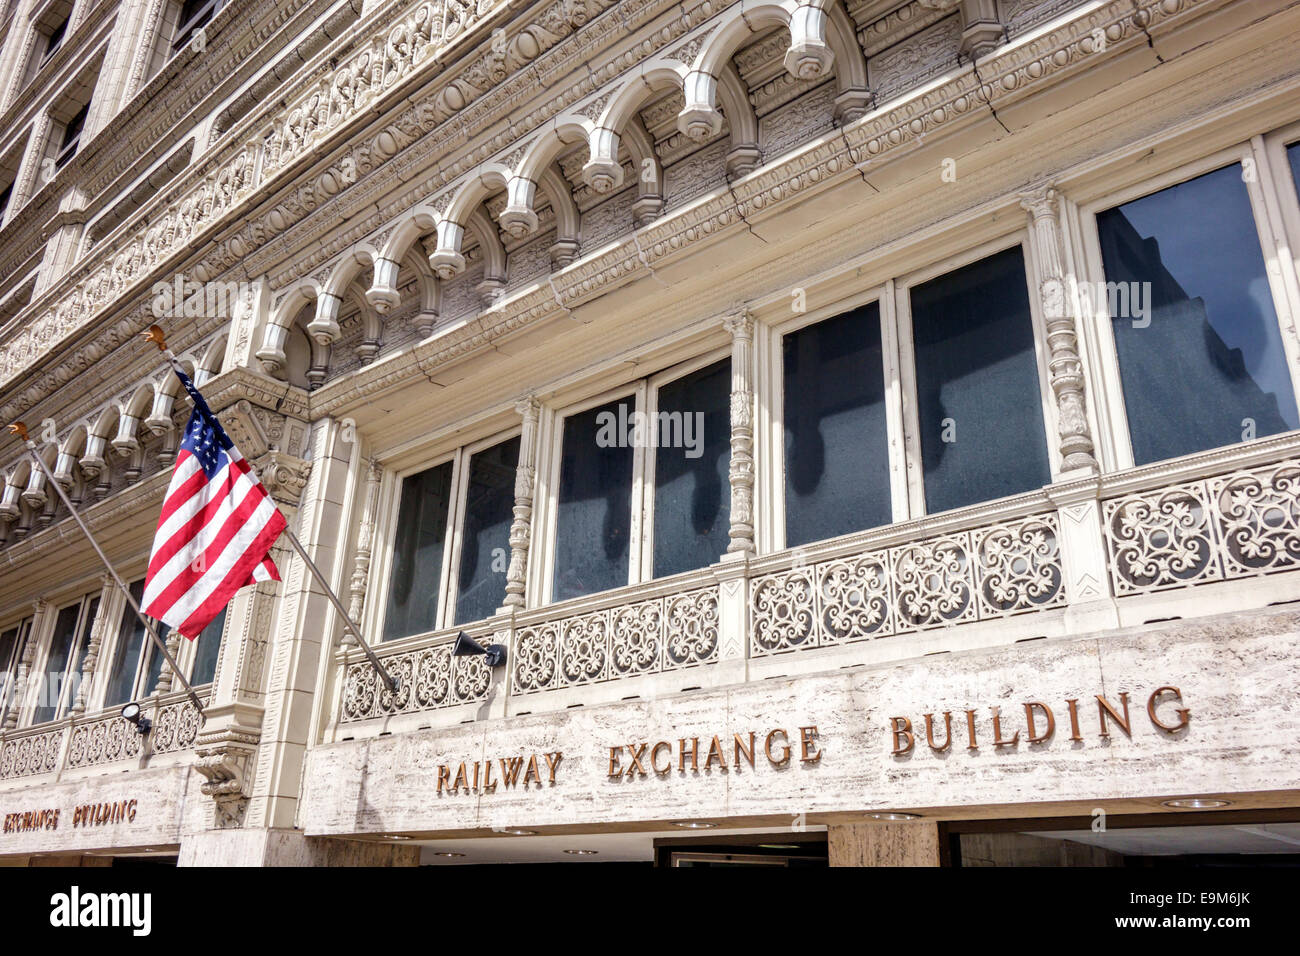 Saint St. Louis Missouri,downtown,Railway Exchange building,high rise,office building,Chicago school architectural style,detail,front,flag,MO140901046 Stock Photo